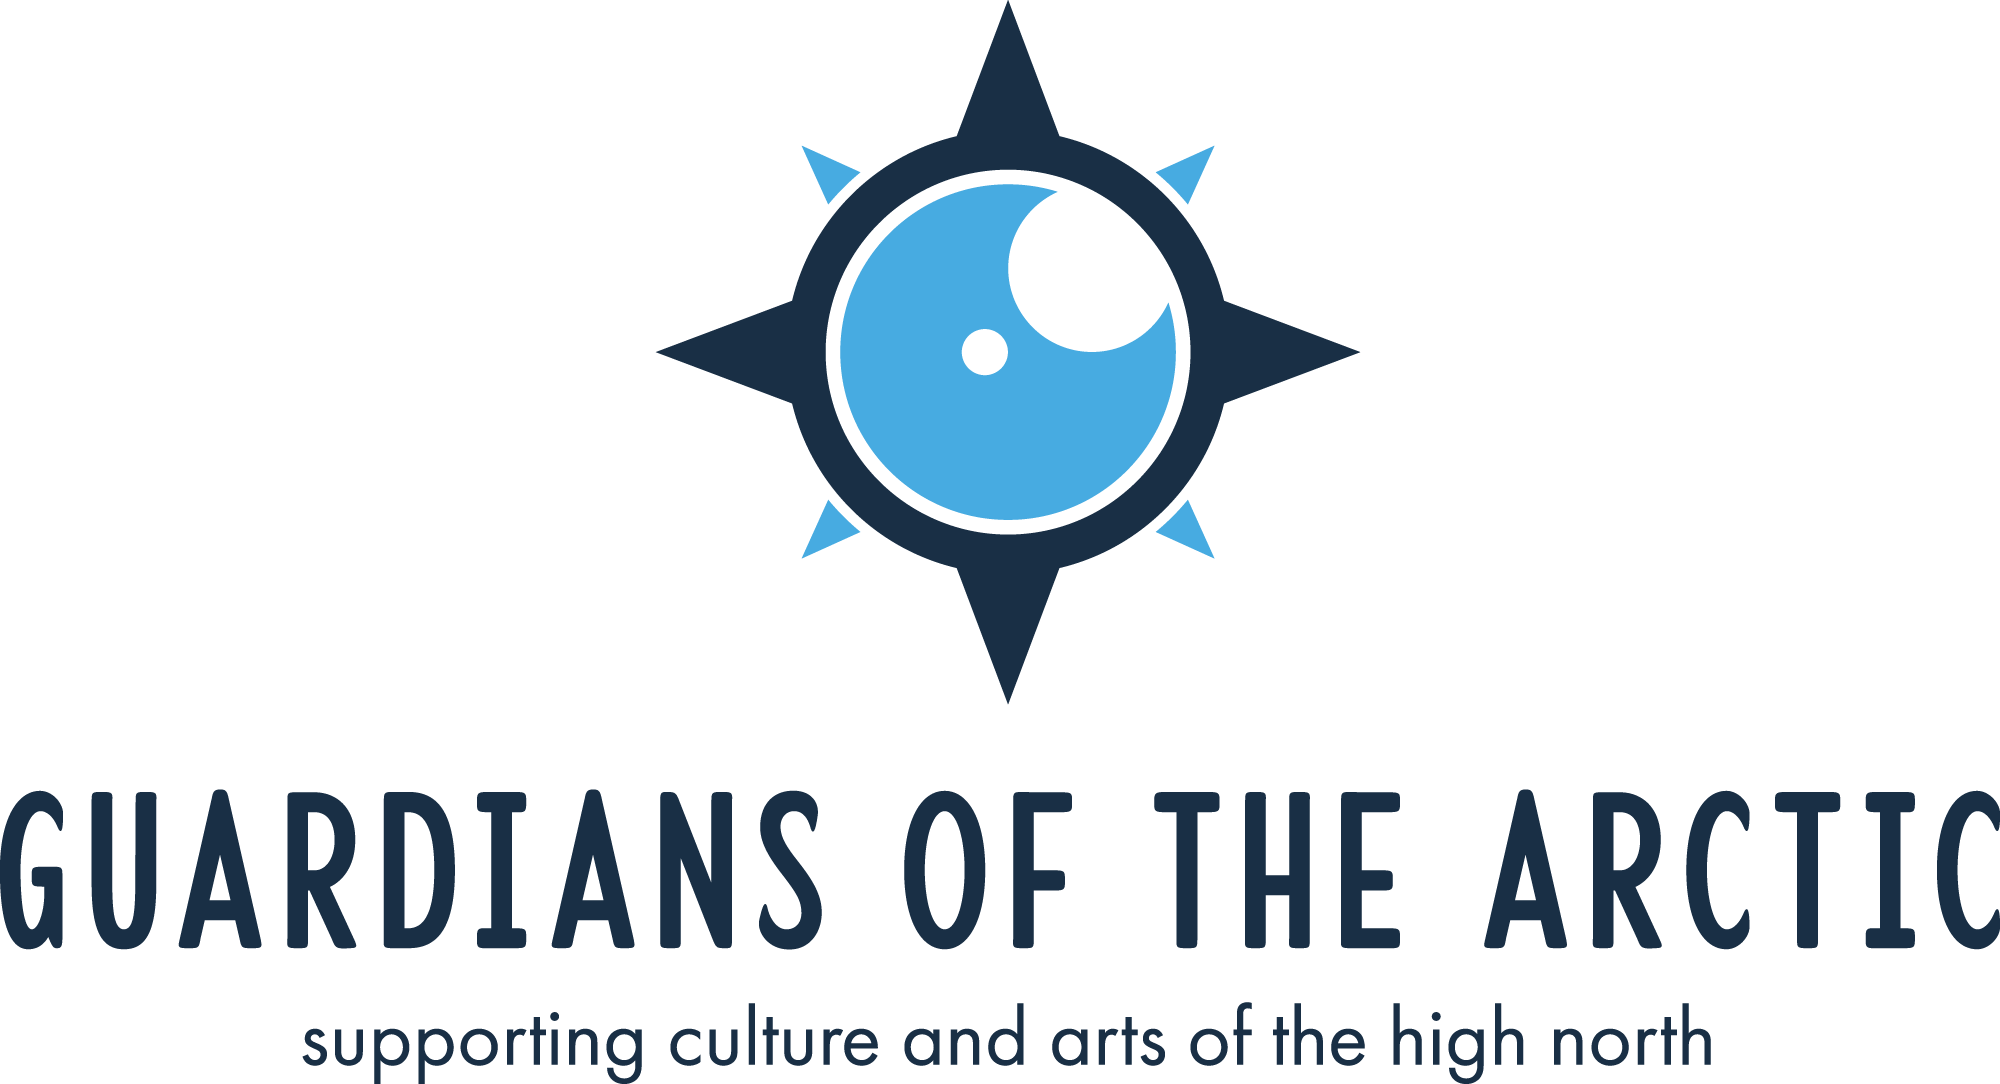 Guardians of the Arctic is a project focused on promoting the culture and 
arts of the indigenous peoples of the High North. It is an online hub accumulating information about the indigenous peoples of the Russian Arctic and hosting portfolios of indigenous artists and craftsmen.